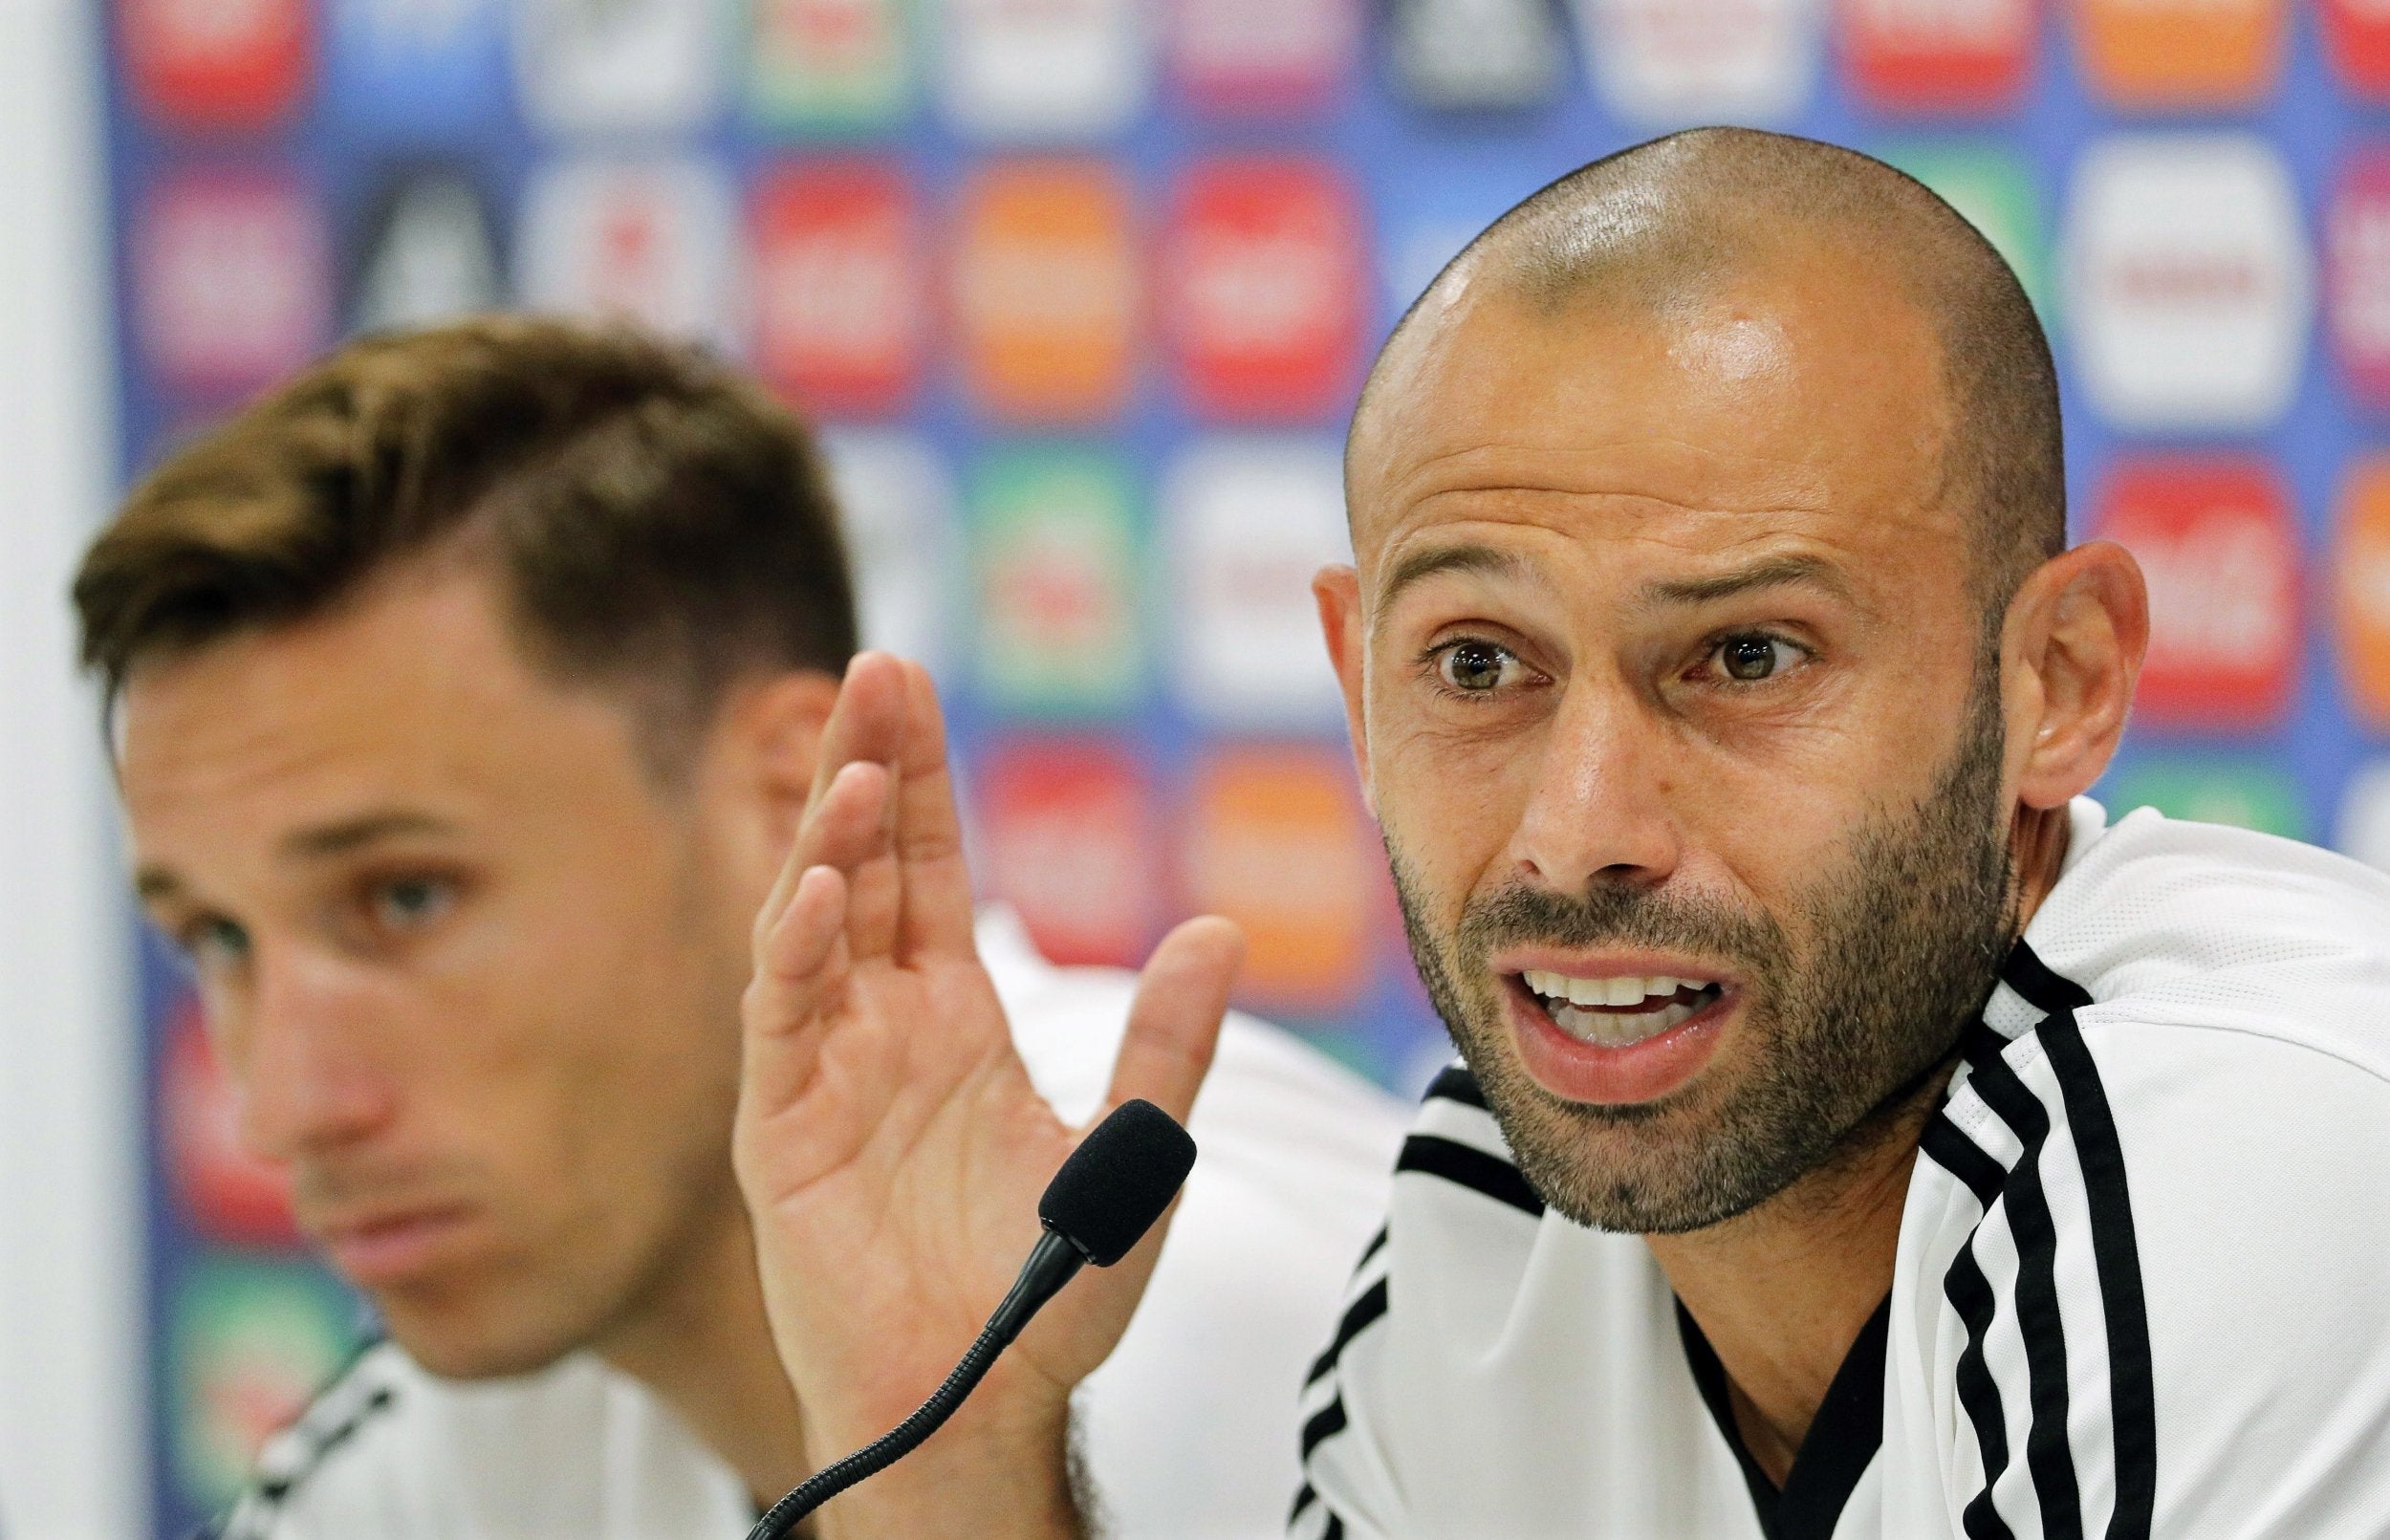 Mascherano has been at the heart of the headlines back home